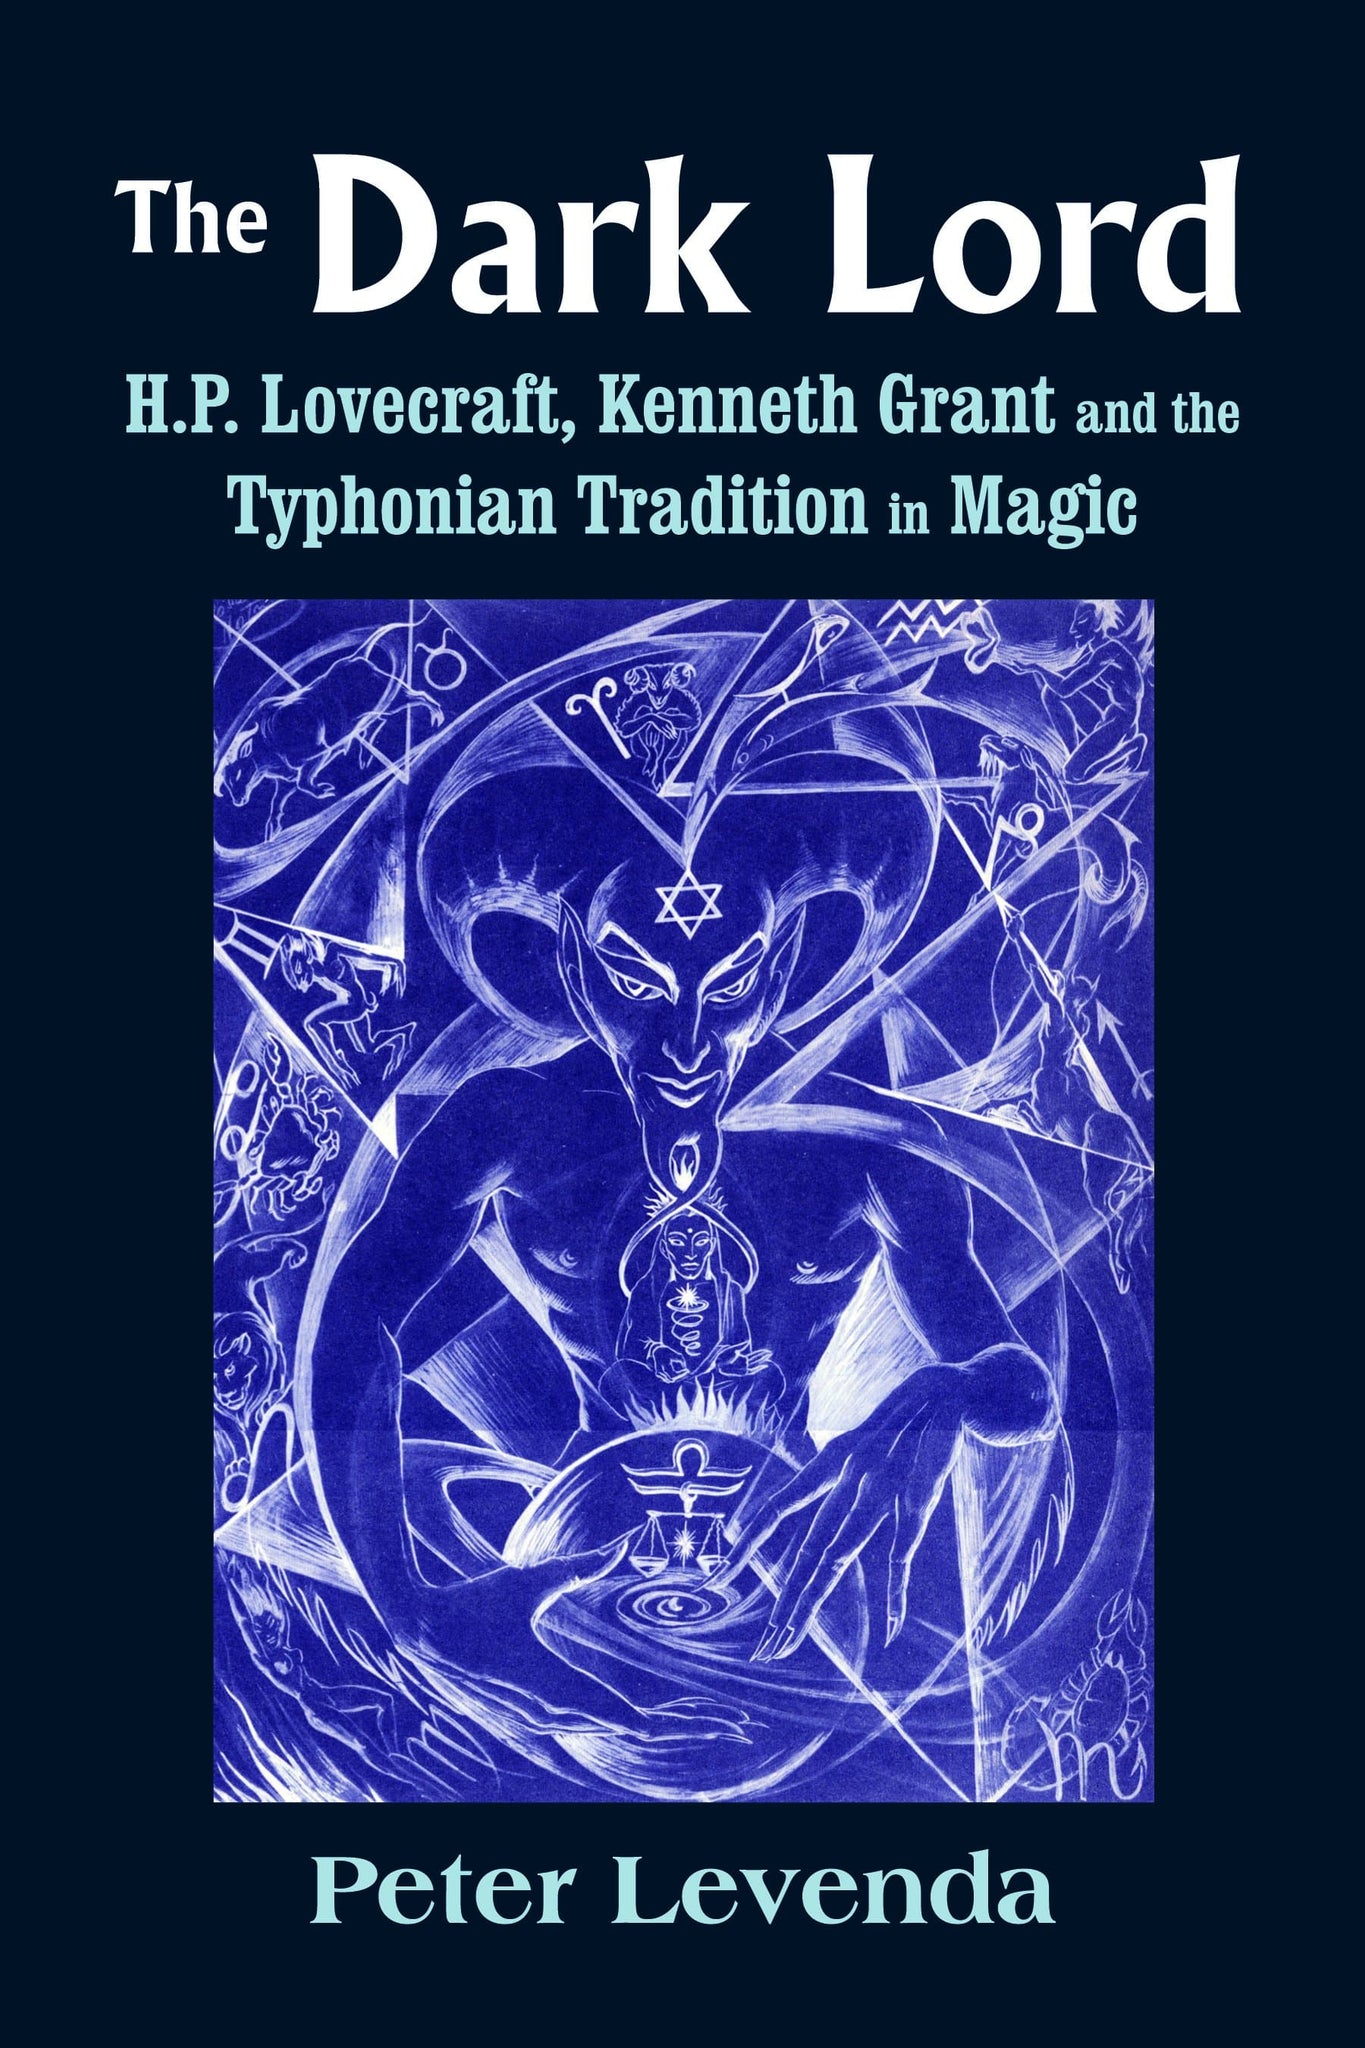 The Dark Lord H.P. Lovecraft, Kenneth Grant, and the Typhonian Tradition in Magic (HC) By Peter Levenda